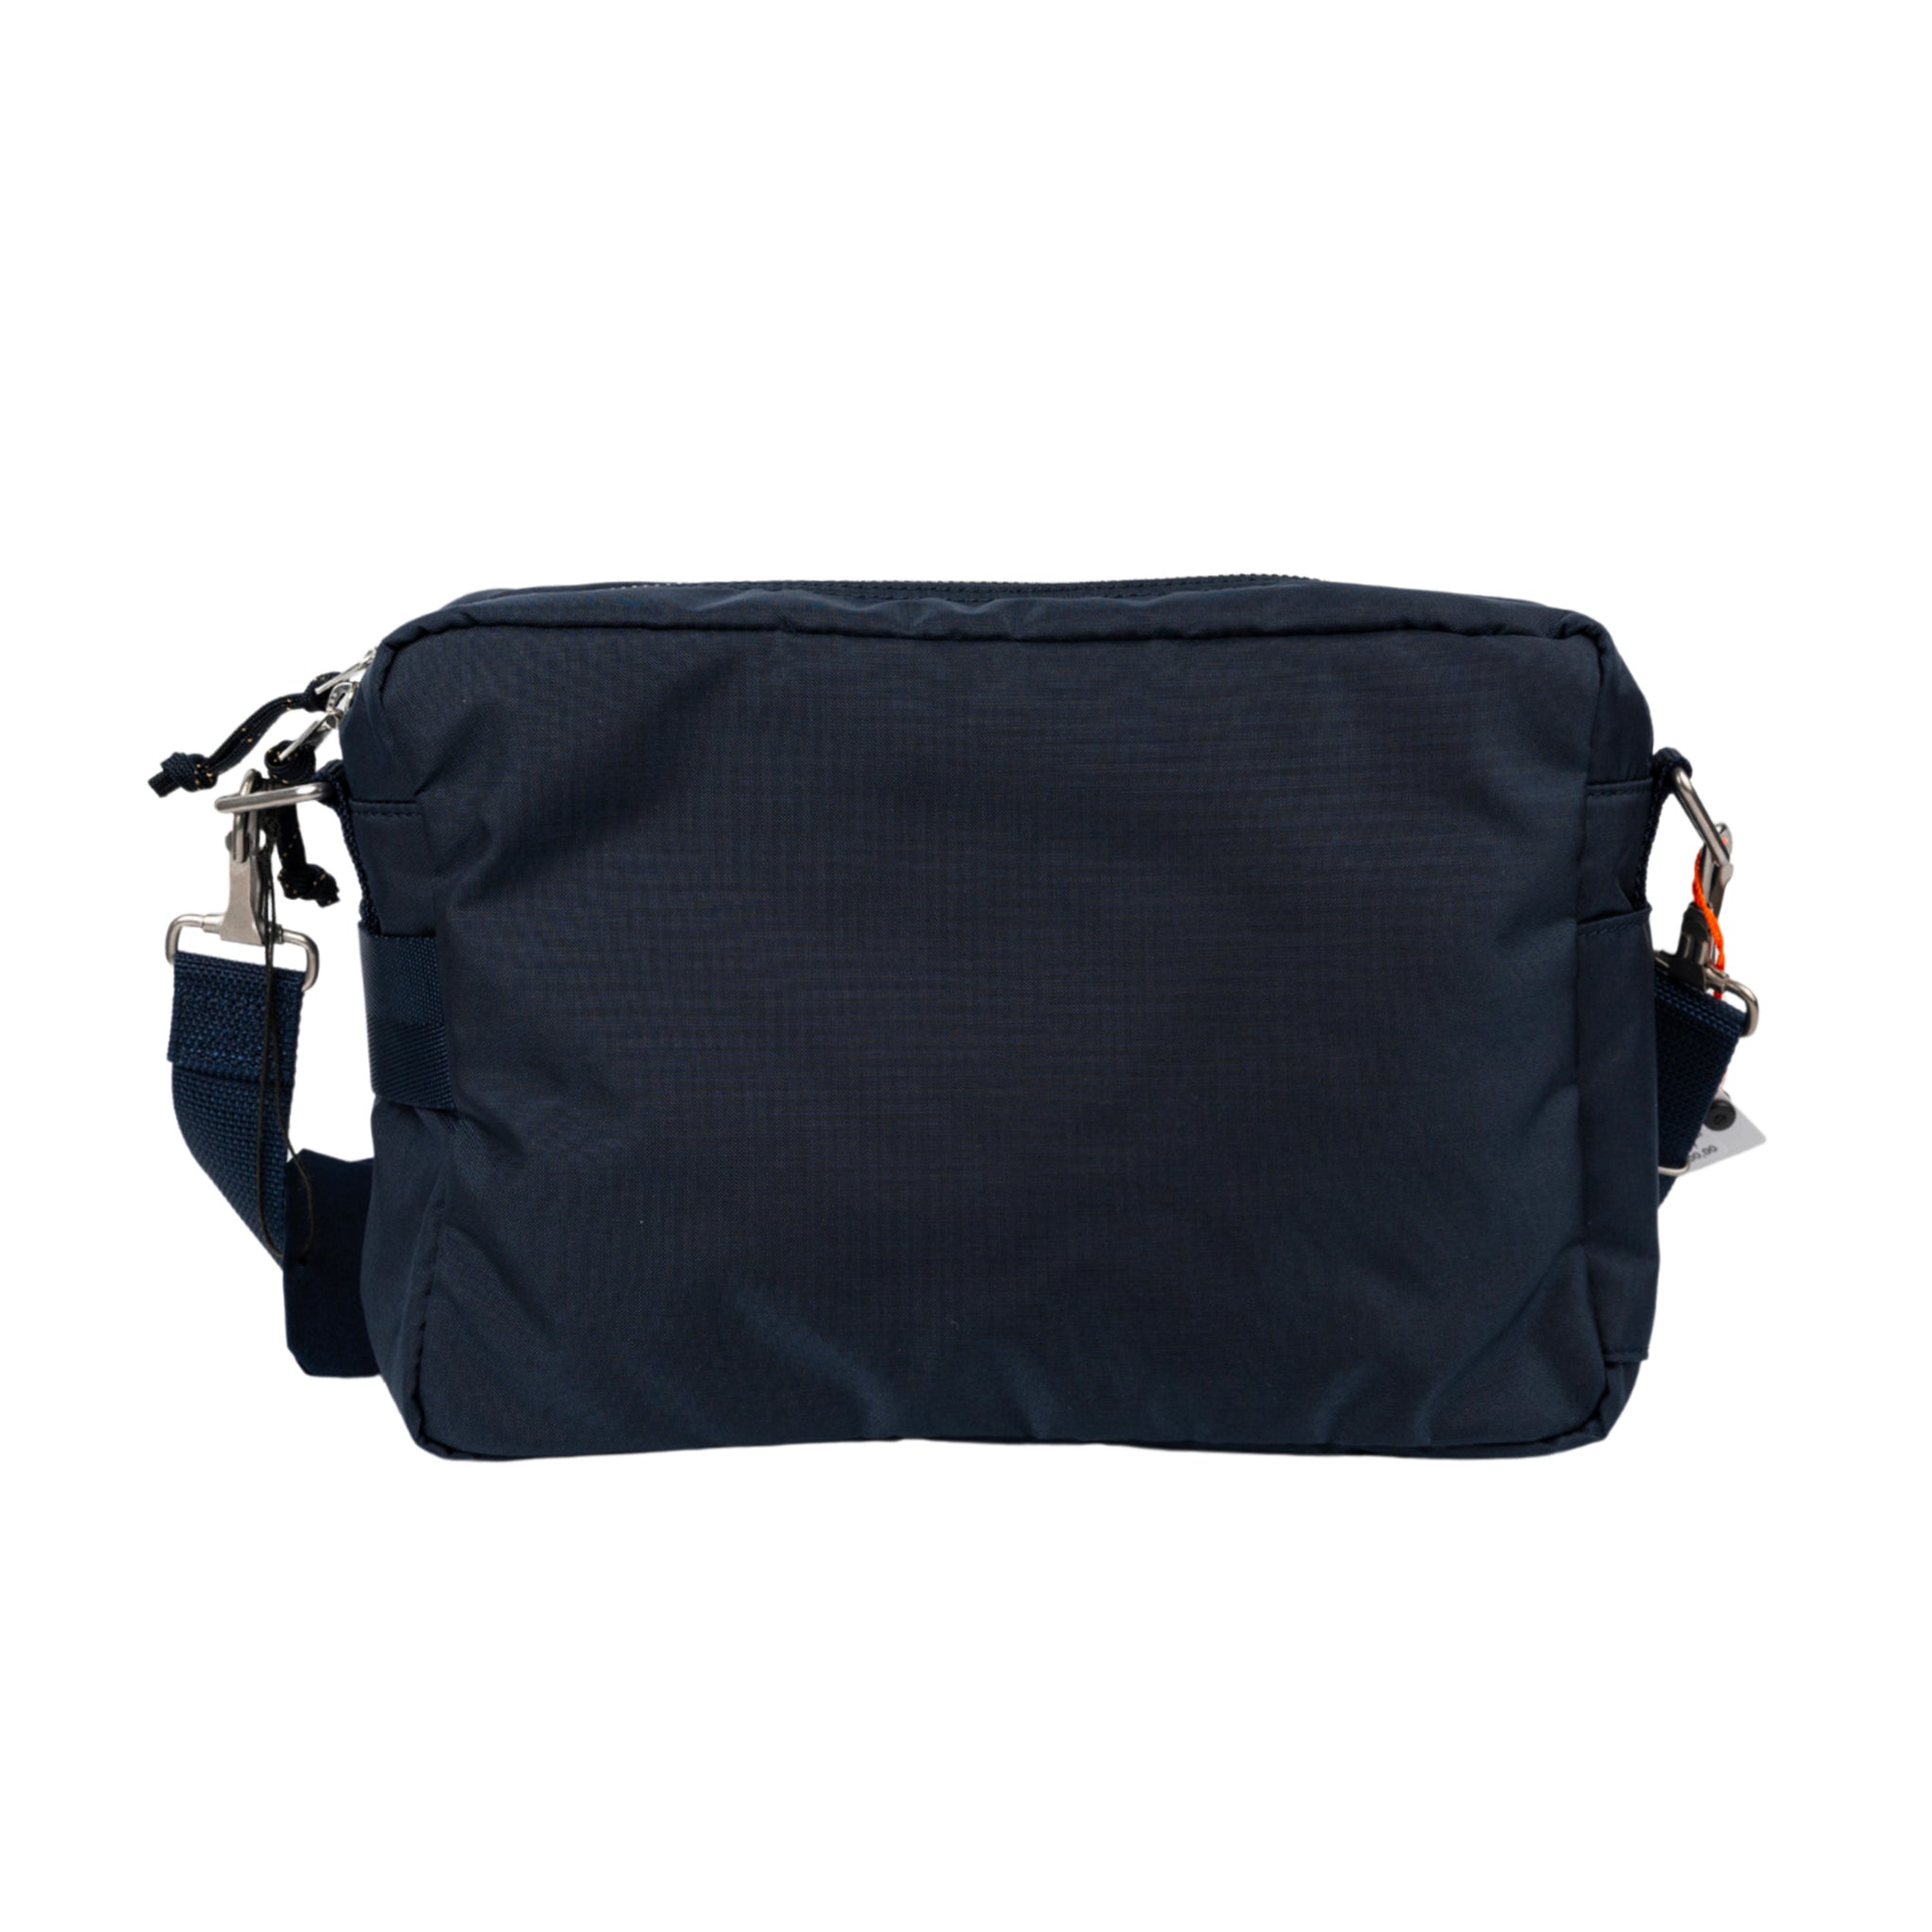 Force borsa a tracolla in nylon in blu navy